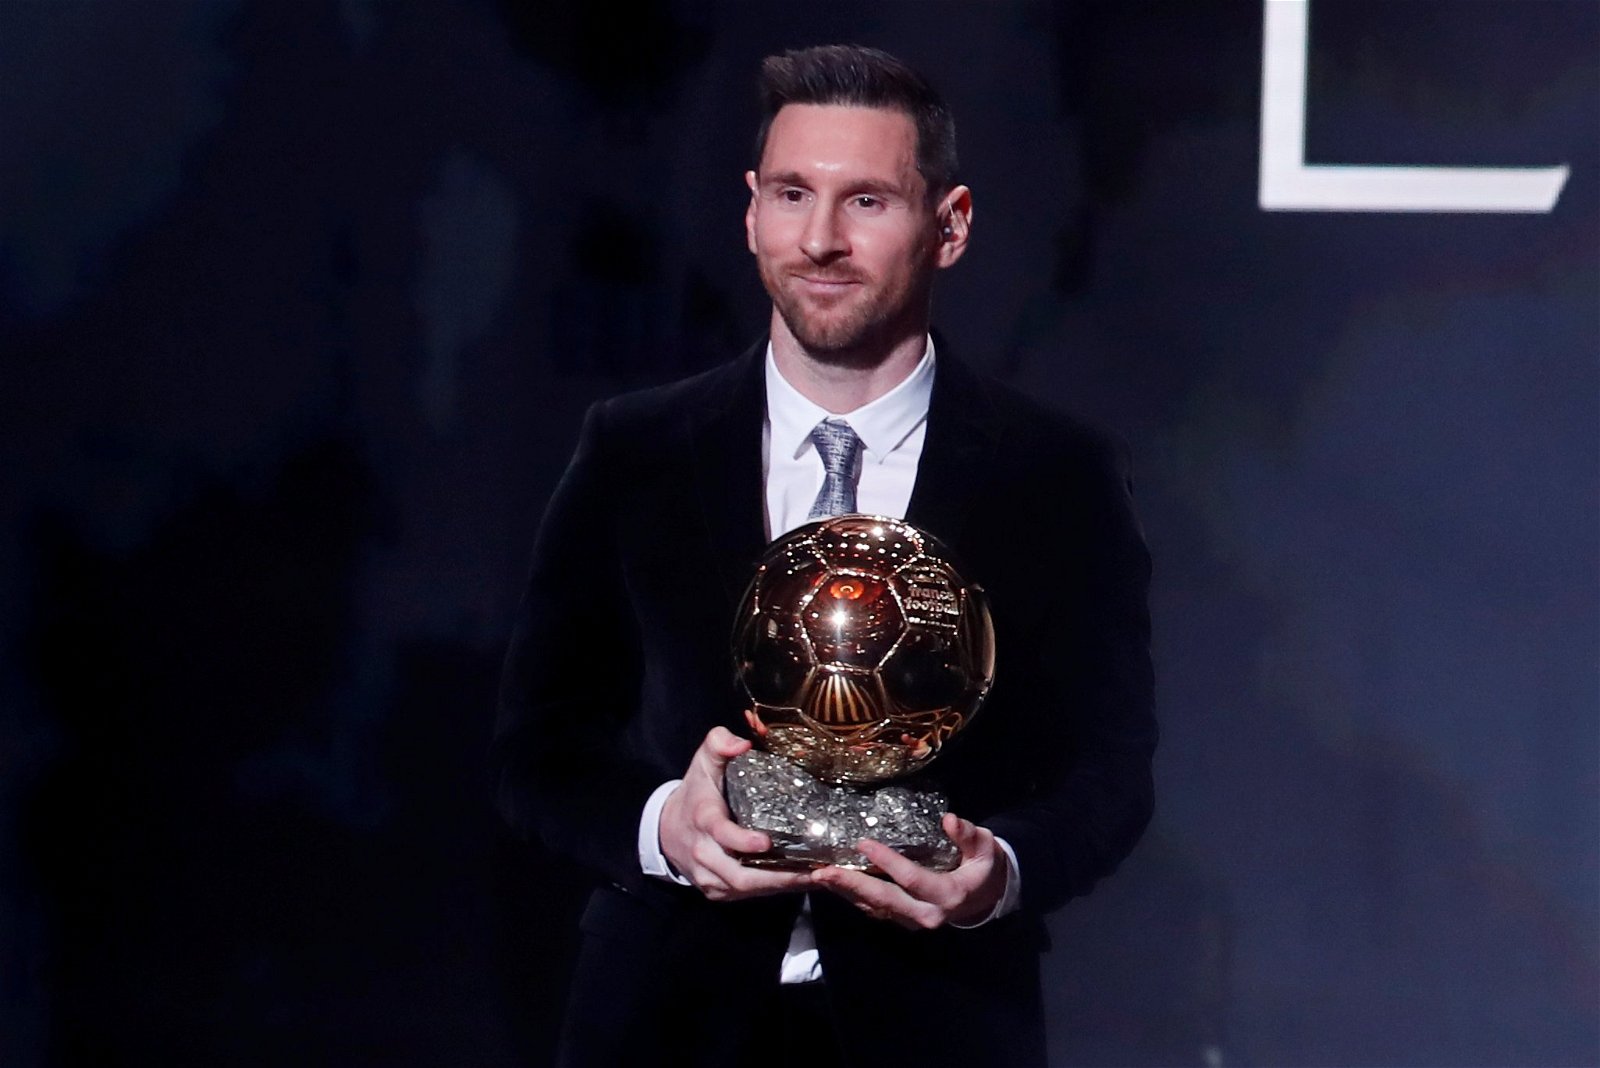 Lionel Messi wins record eighth Ballon d'Or in Paris